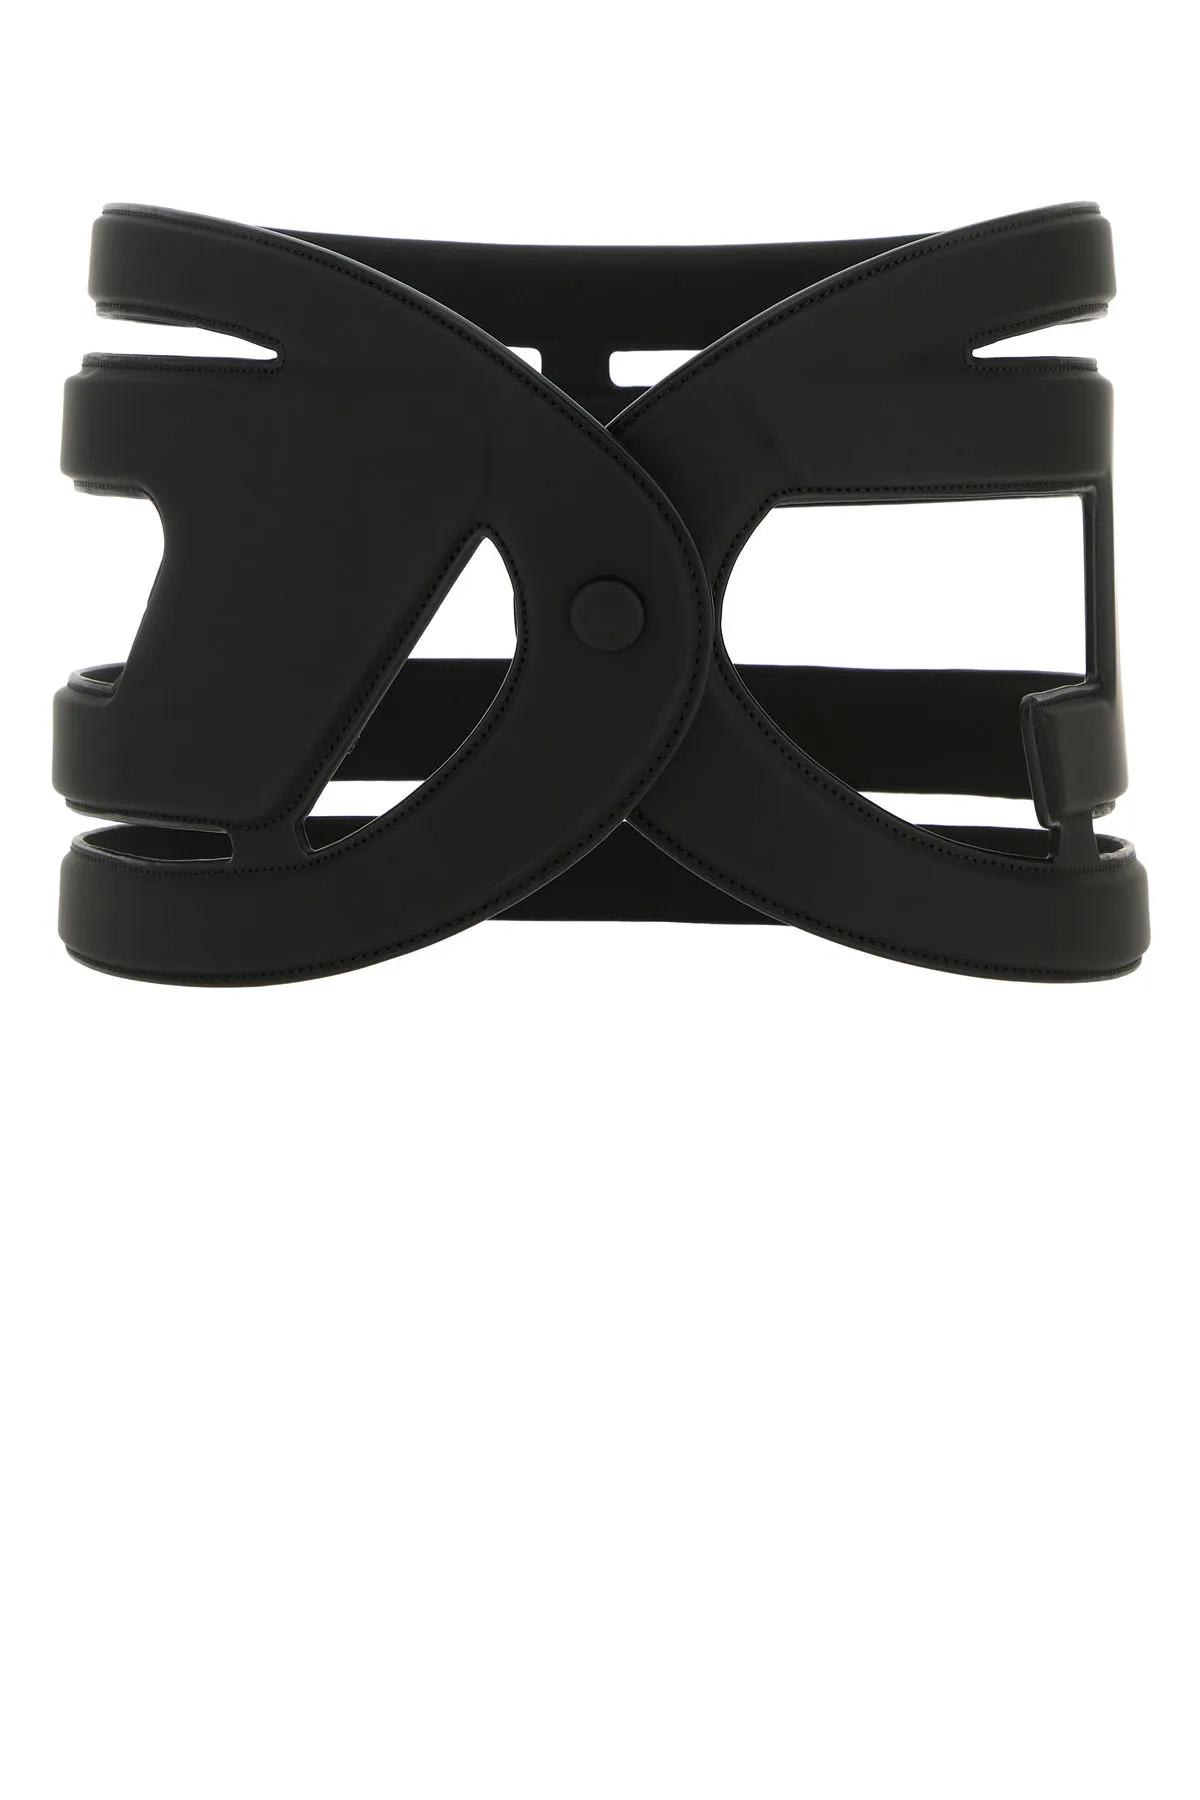 Diesel Black Synthetic Leather B-cage-d Maxi Belt